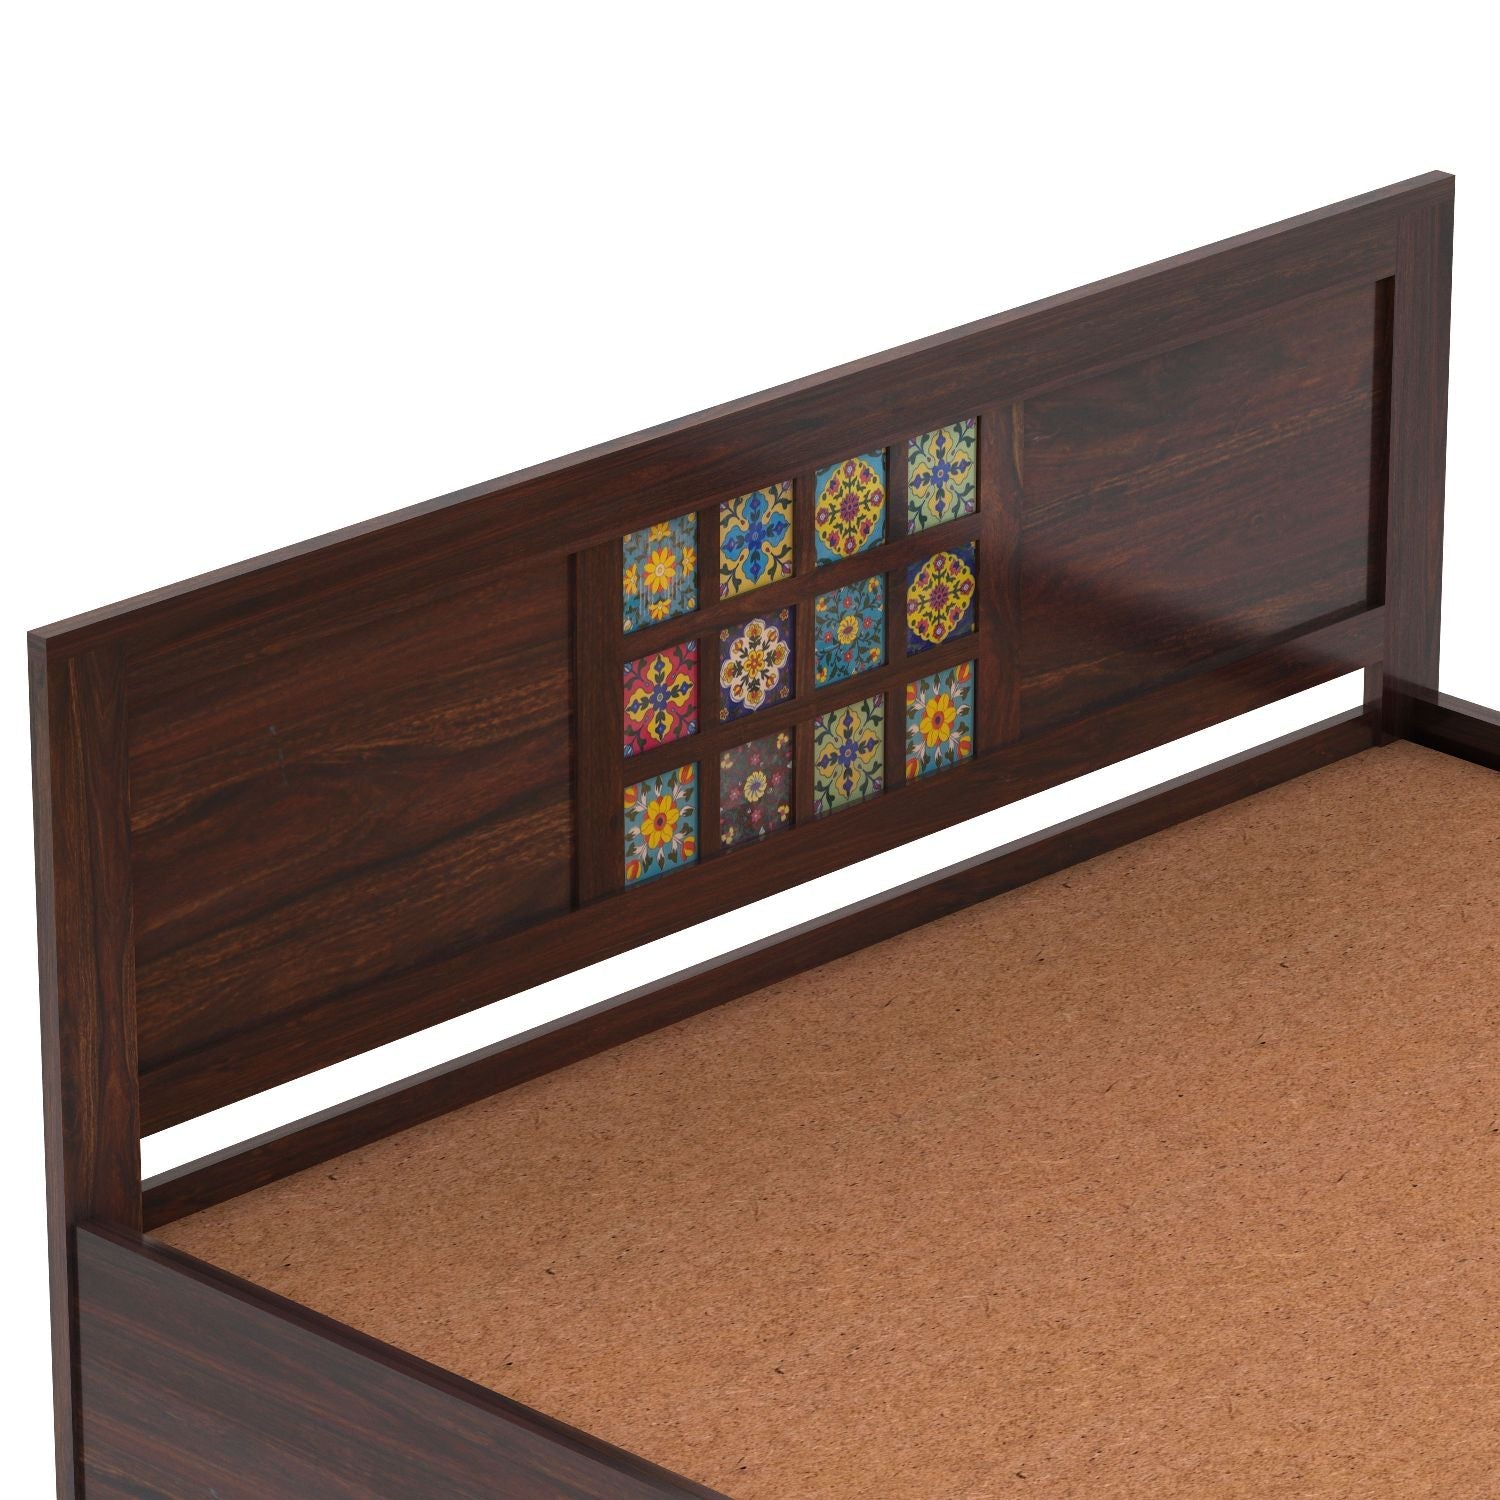 Dotwork Solid Sheesham Wood Hydraulic Bed With Box Storage (Queen Size, Walnut Finish)